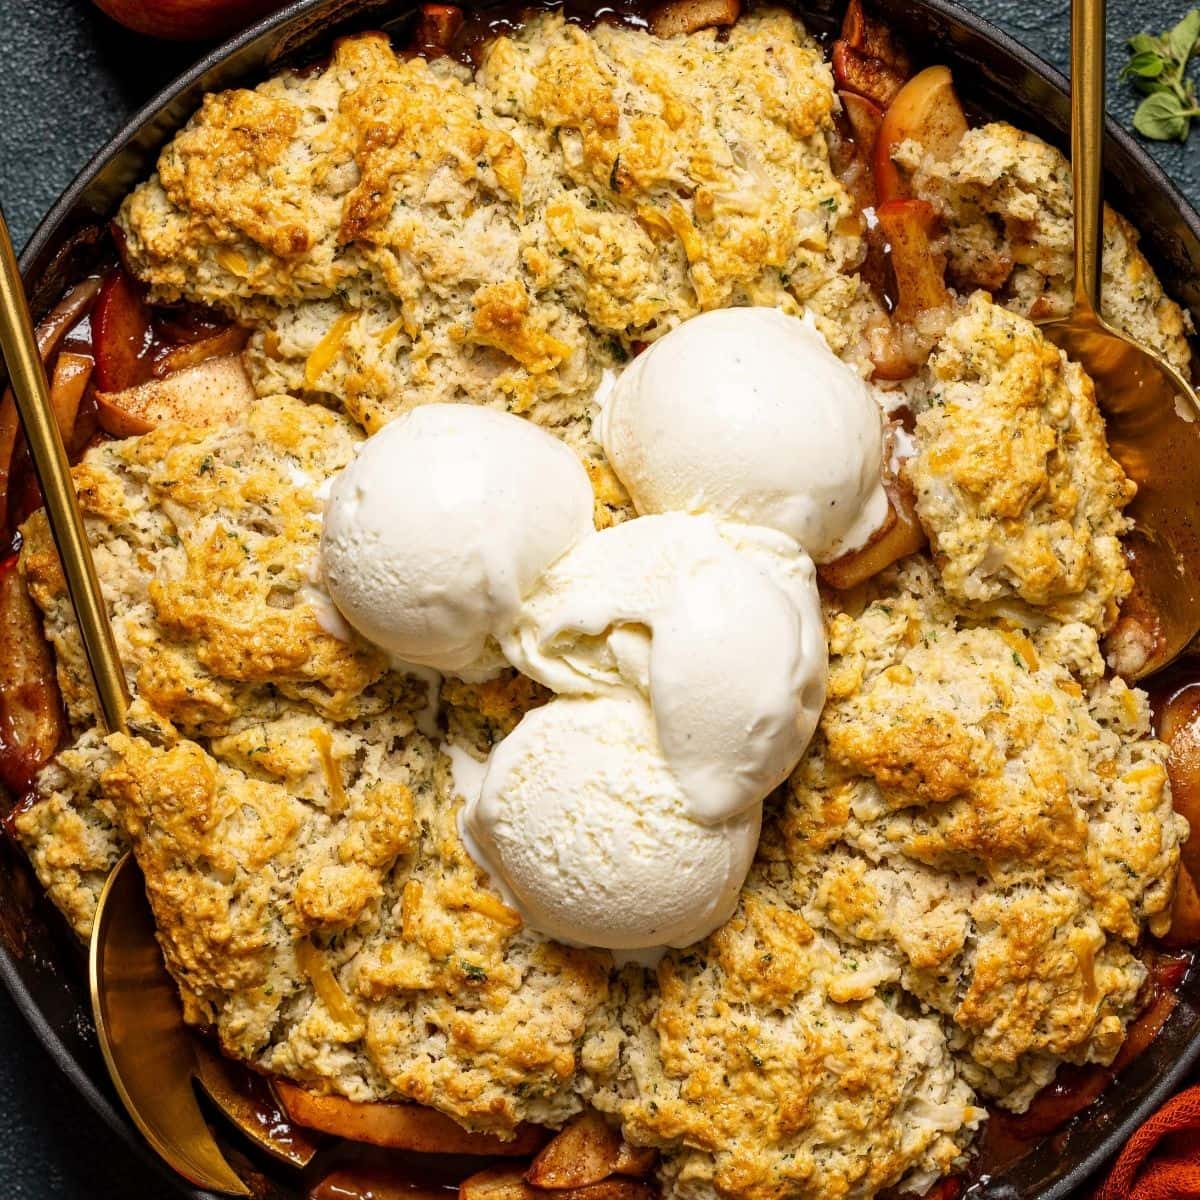 Up close shot of baked cobbler with scoops of ice cream and serving spoons.